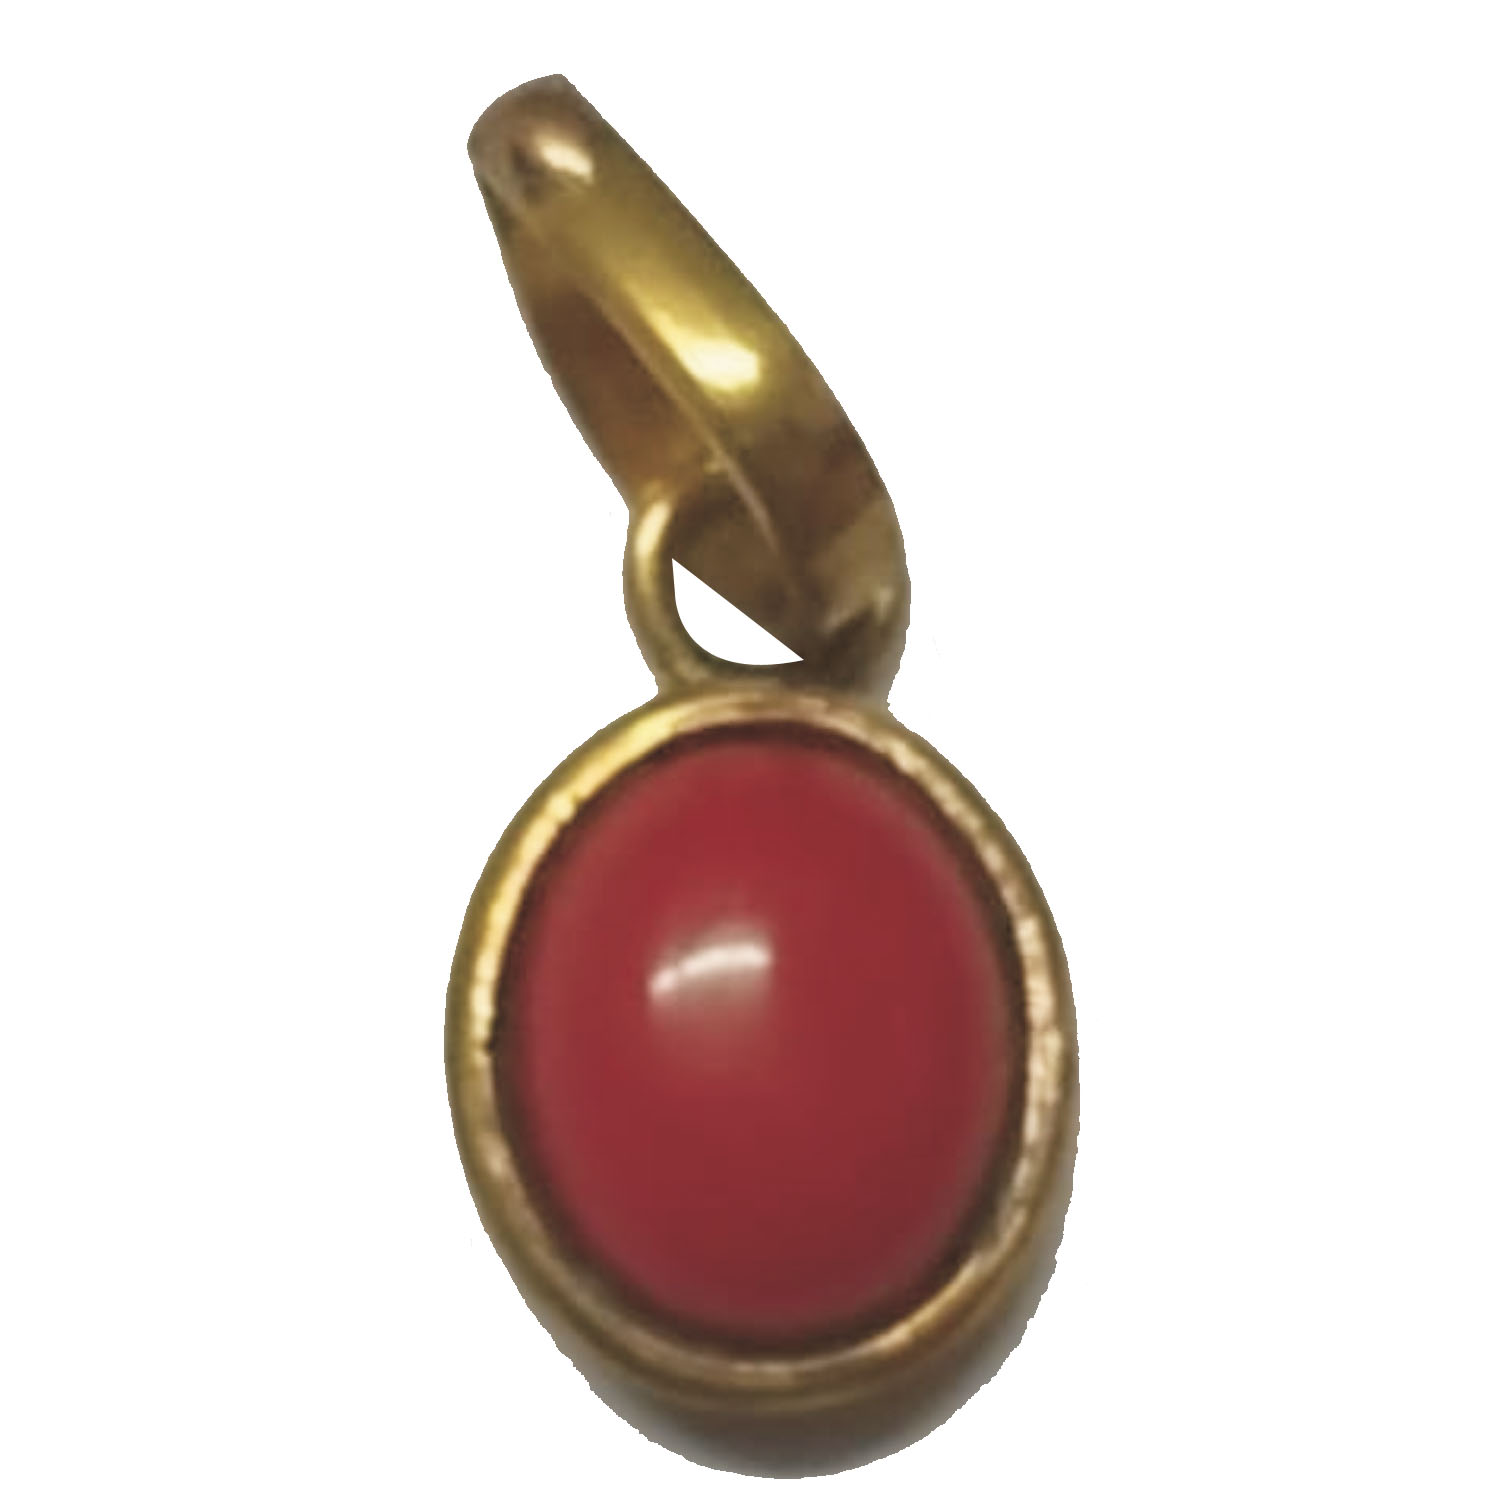 What is the best procedure for wearing red coral gemstones? - Quora